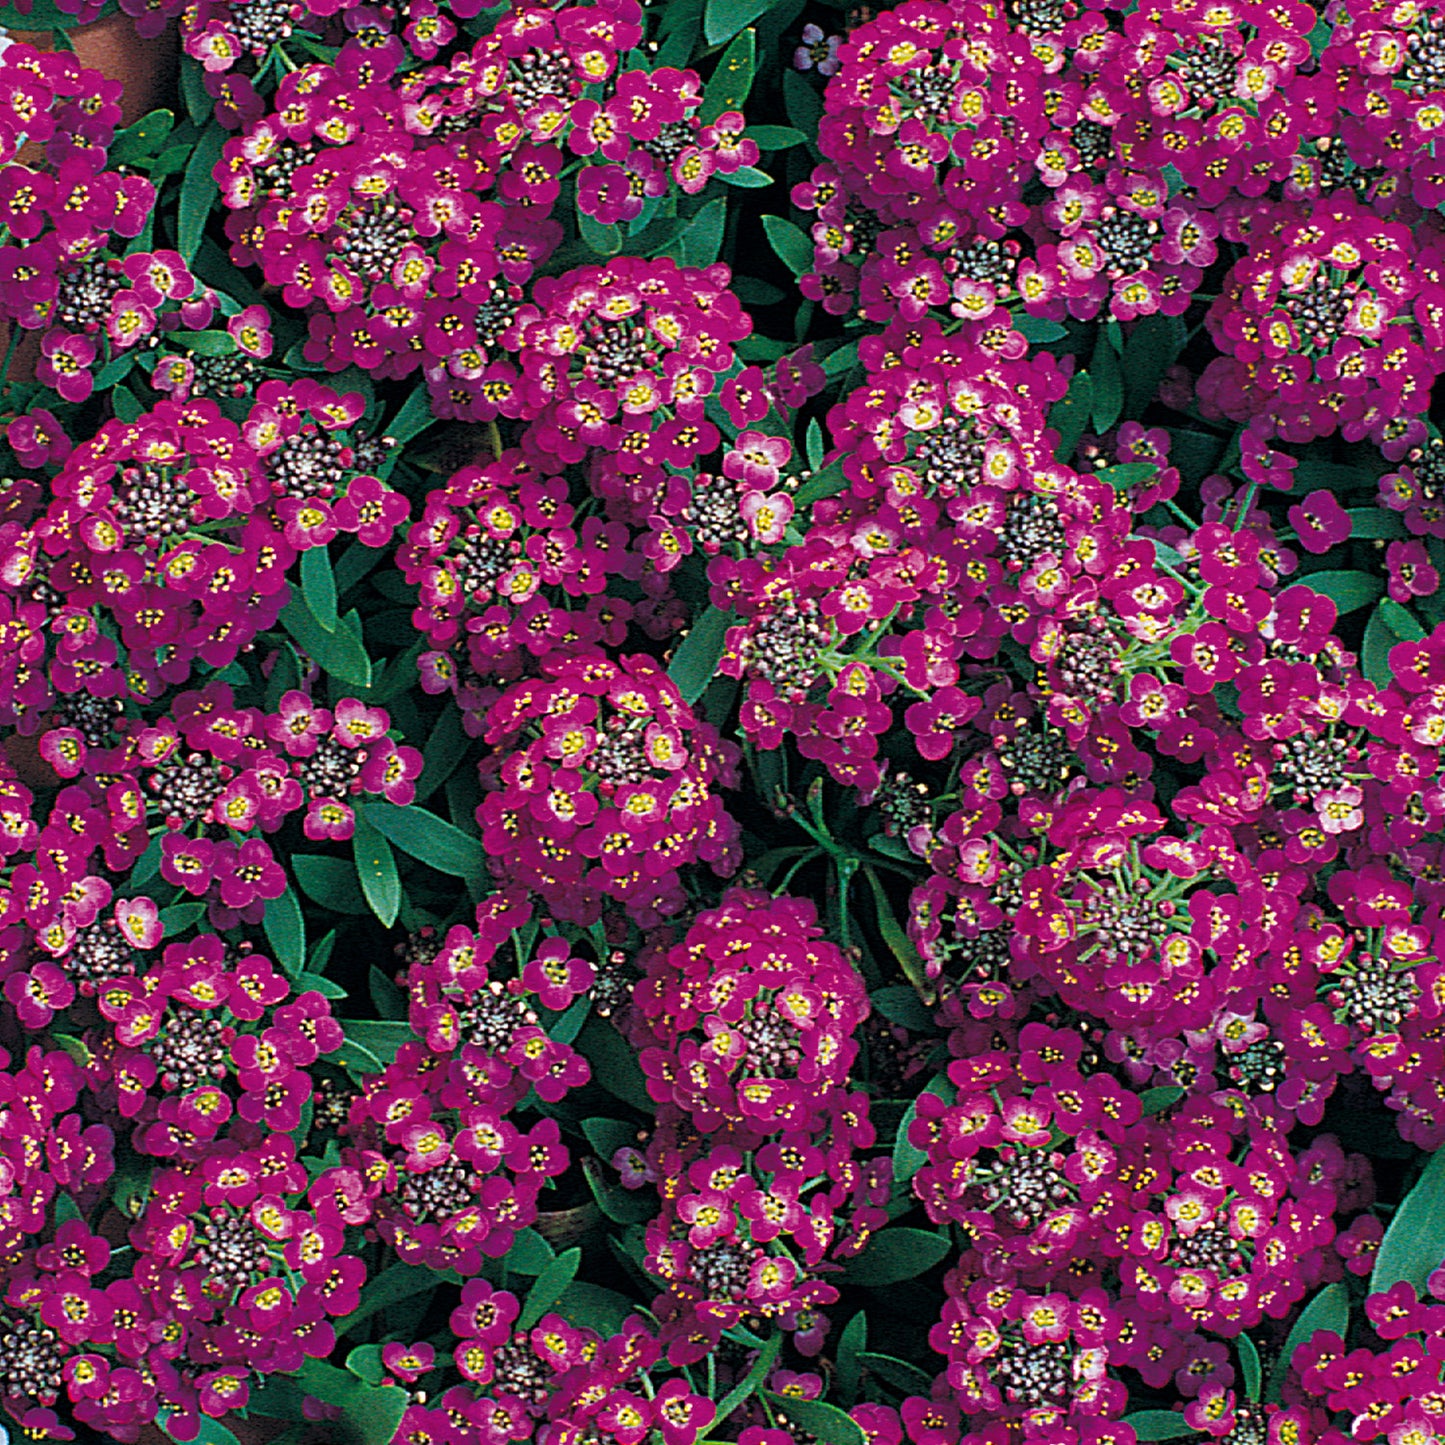 Royal Carpet Alyssum flower seeds from Ferry-Morse, fully grown and blooming their beautiful purple blossoms.